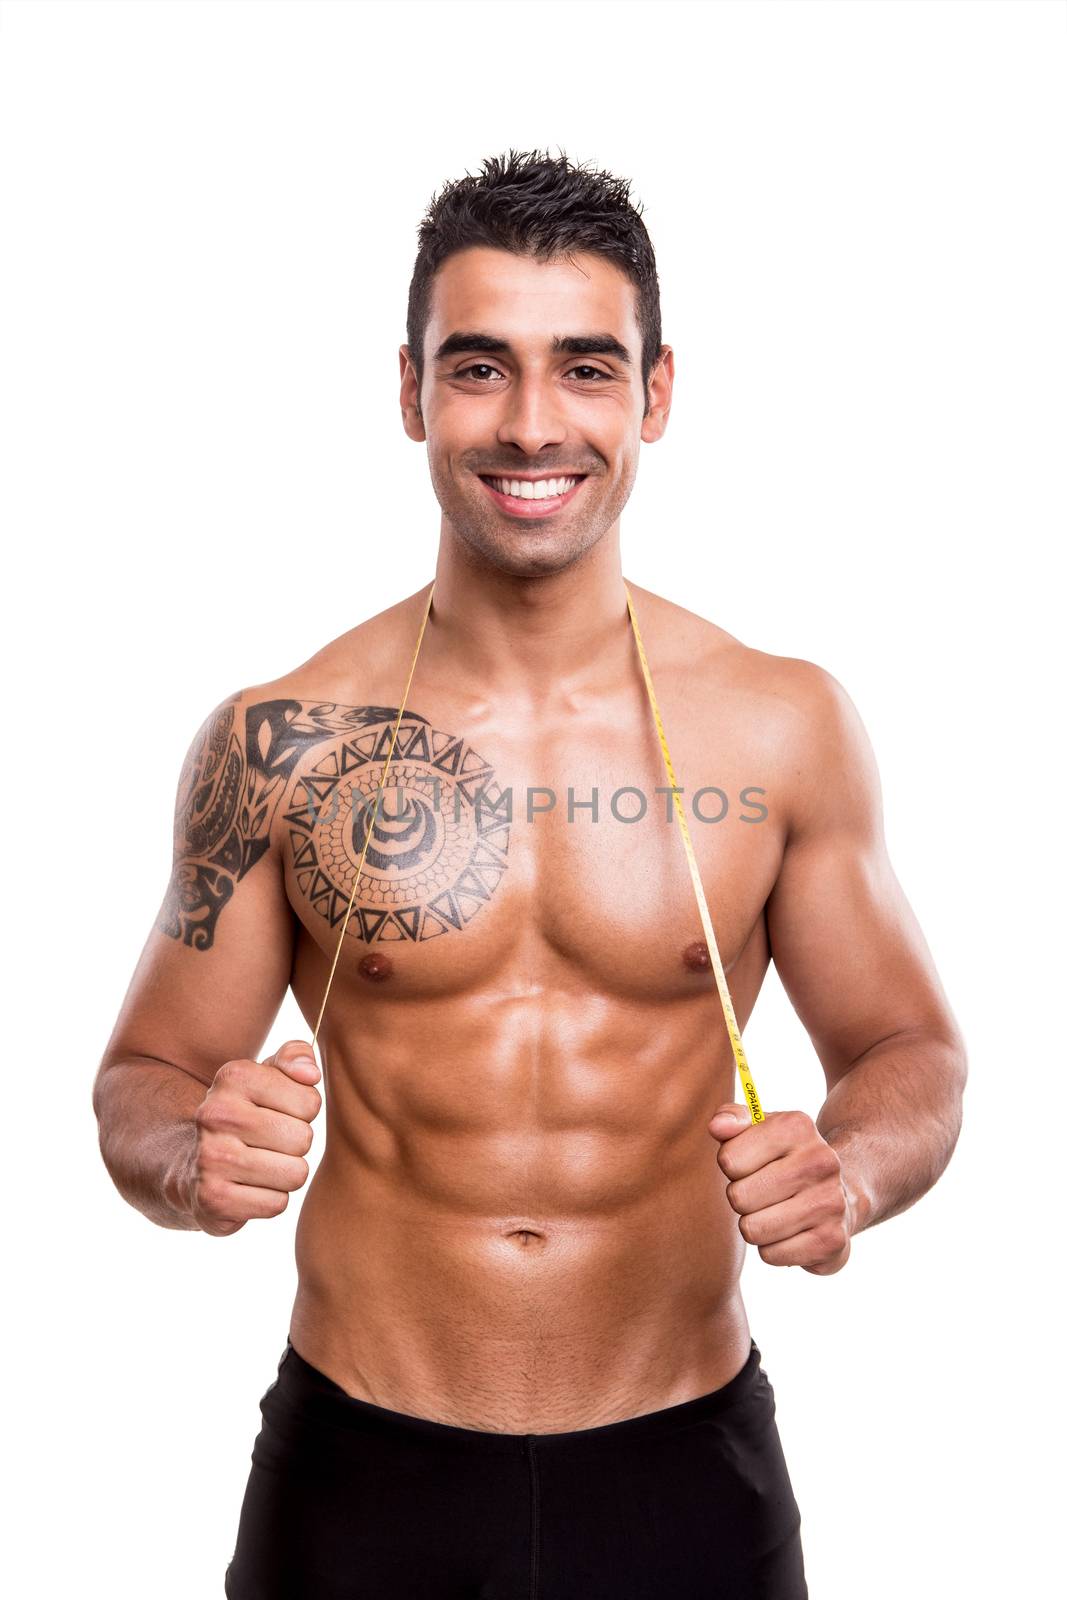 Fitness man measuring his body over white background